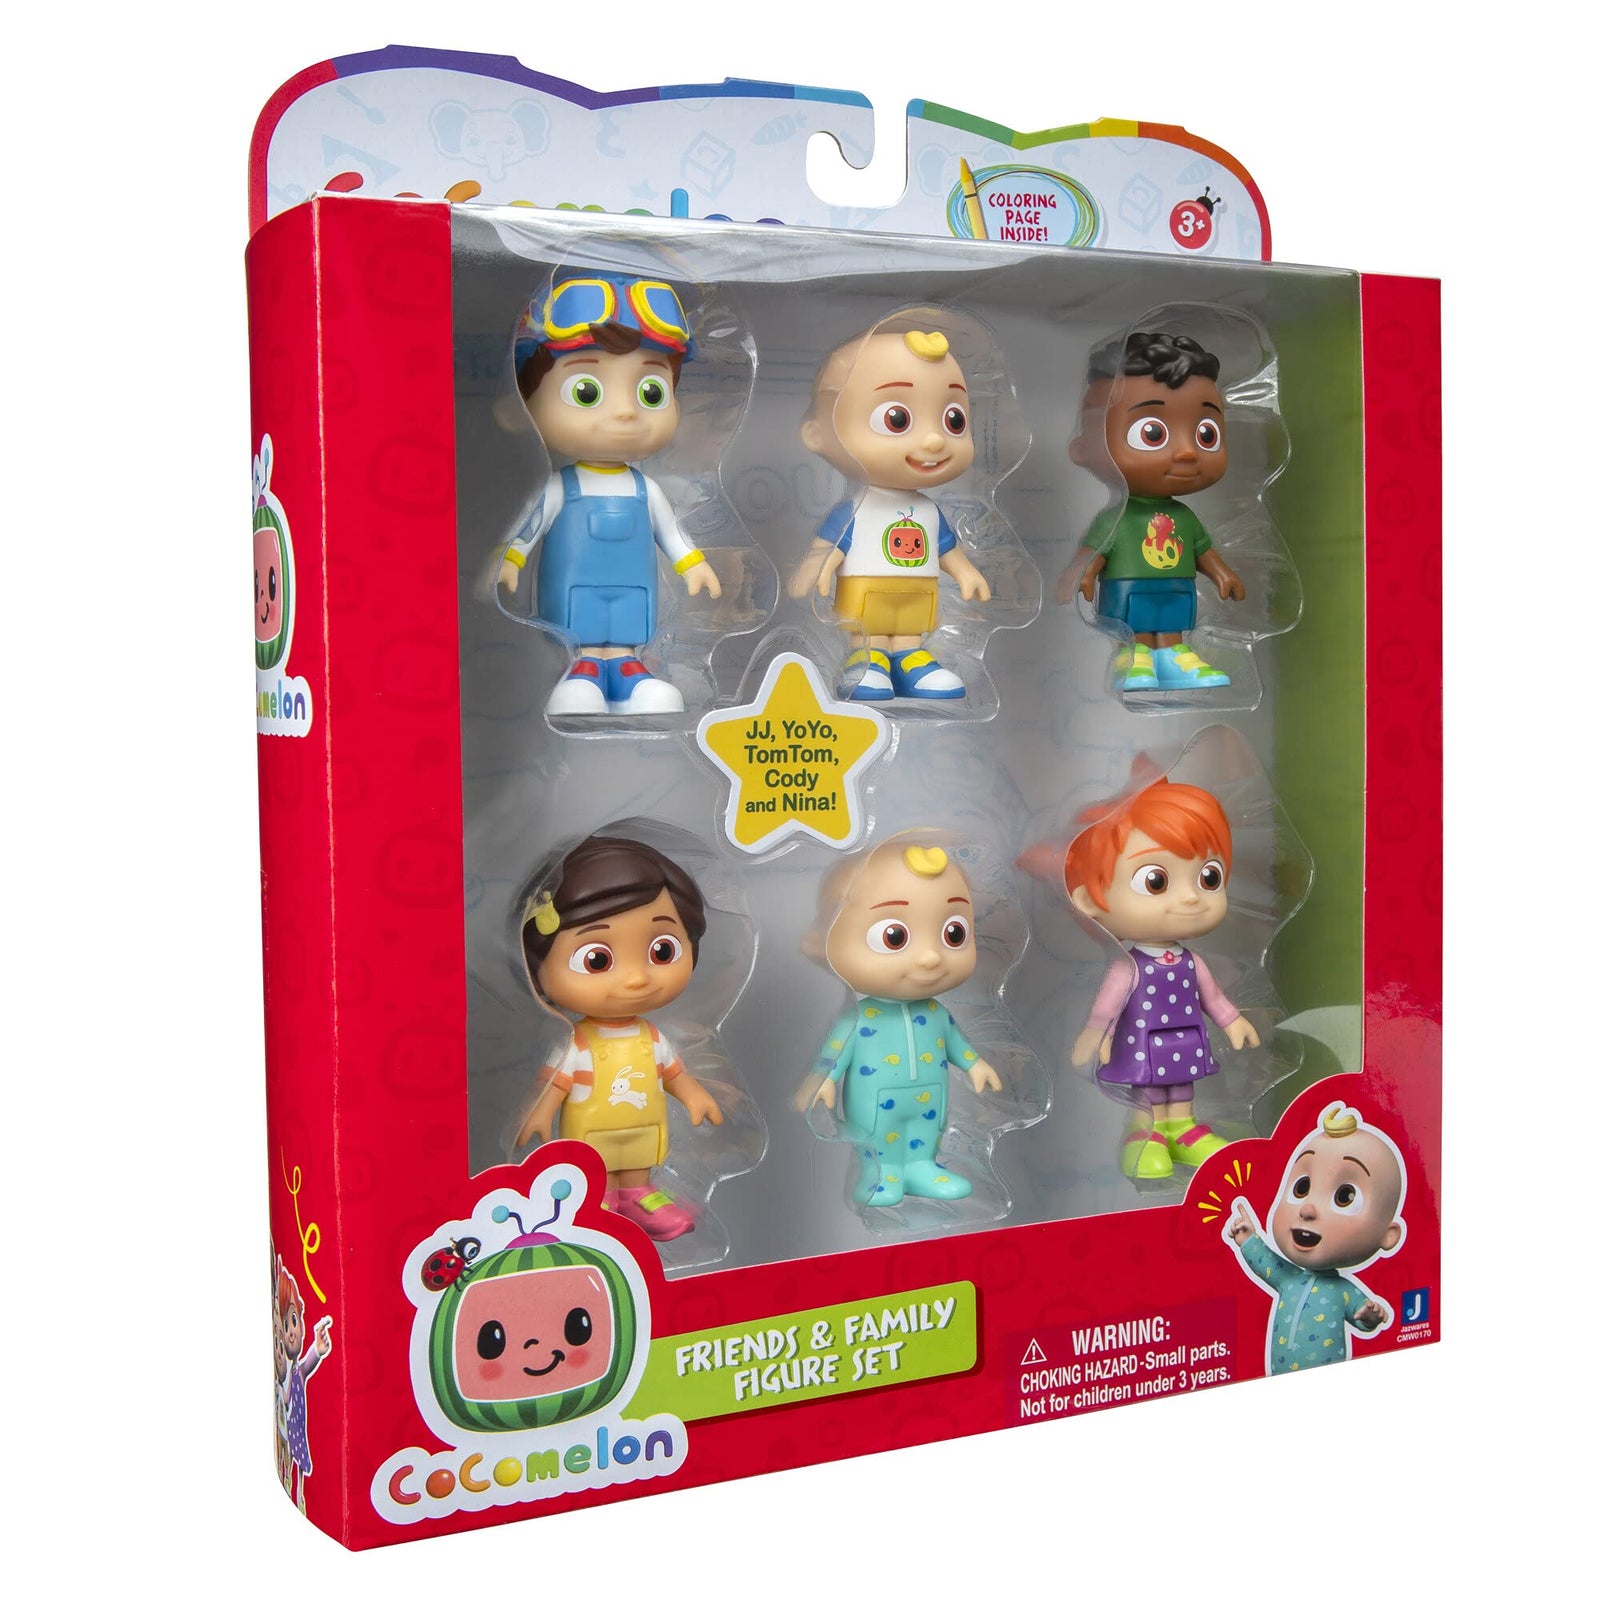 CoComelon Official Friends & Family, 6 Figure Pack - 3 Inch Character Toys - Features Two Baby JJ Figures (Tee and Onesie), Tomtom, YoYo, Cody, and Nina - Toys for Babies and Toddlers